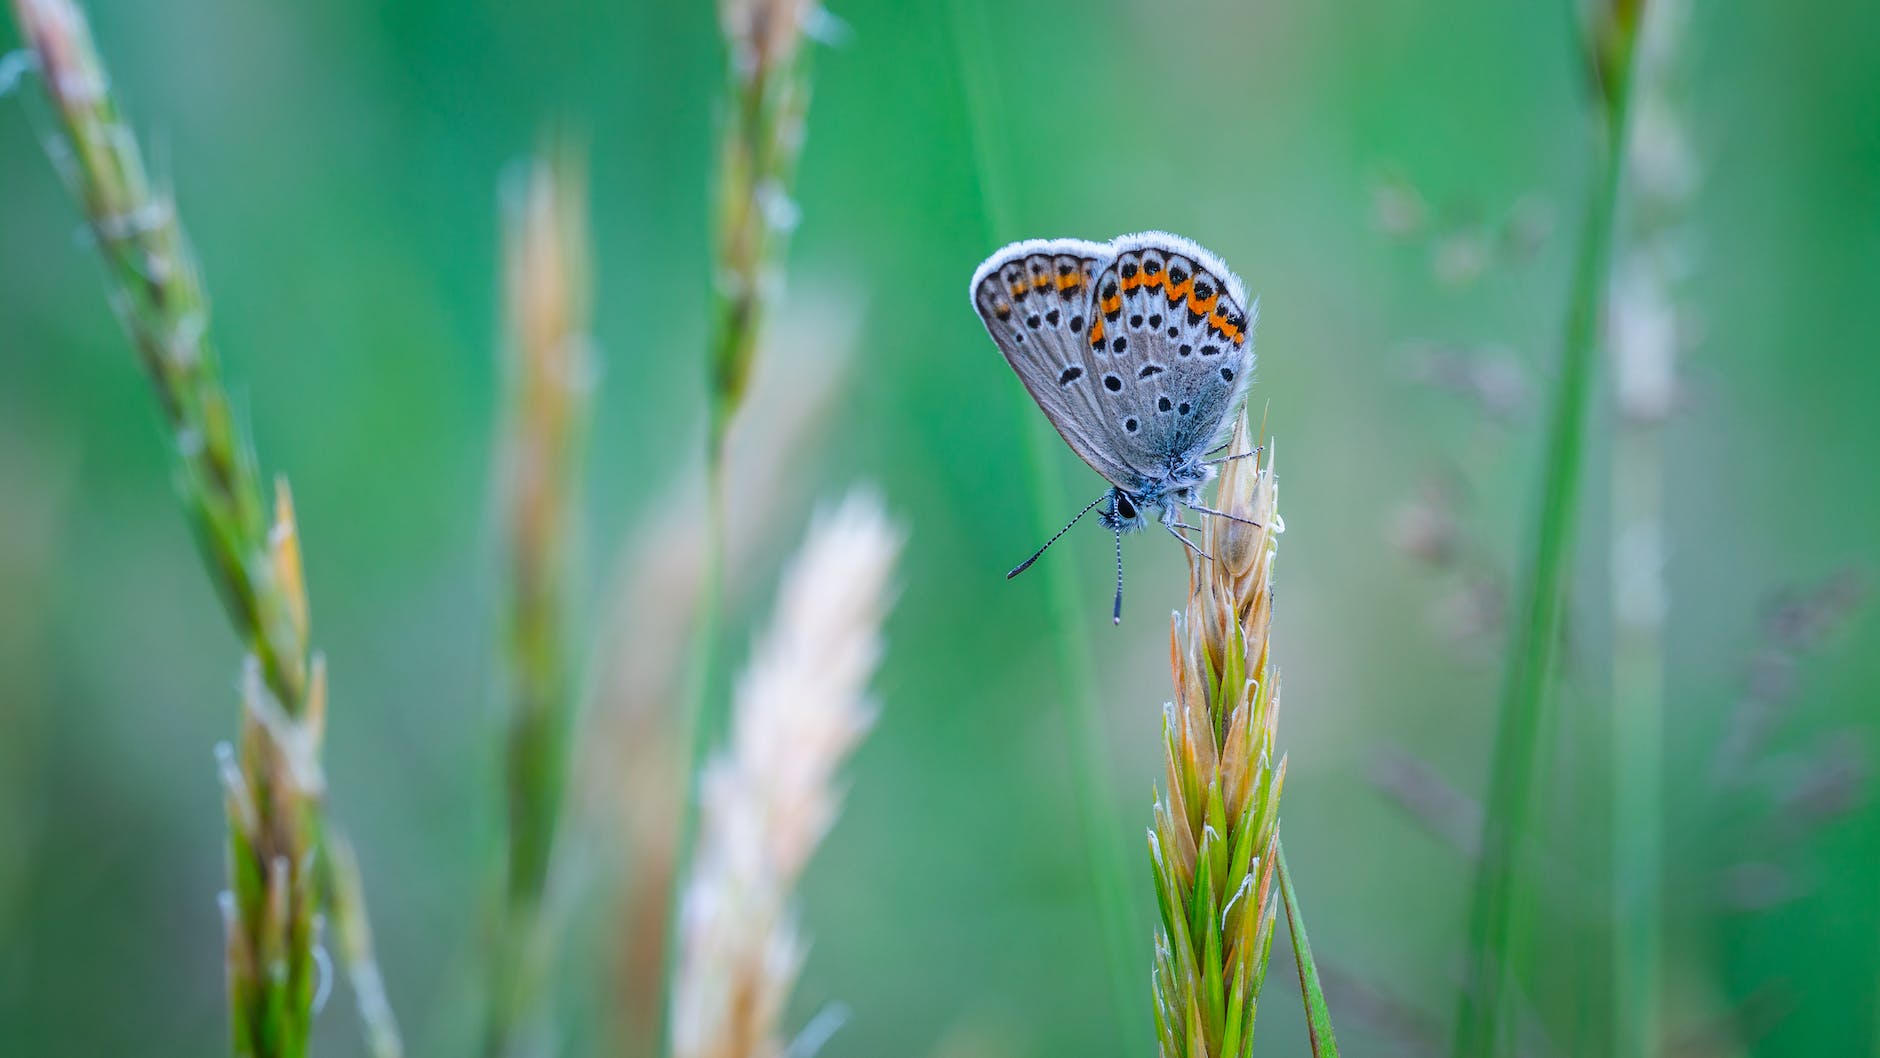 common blue butterfly perched on grass